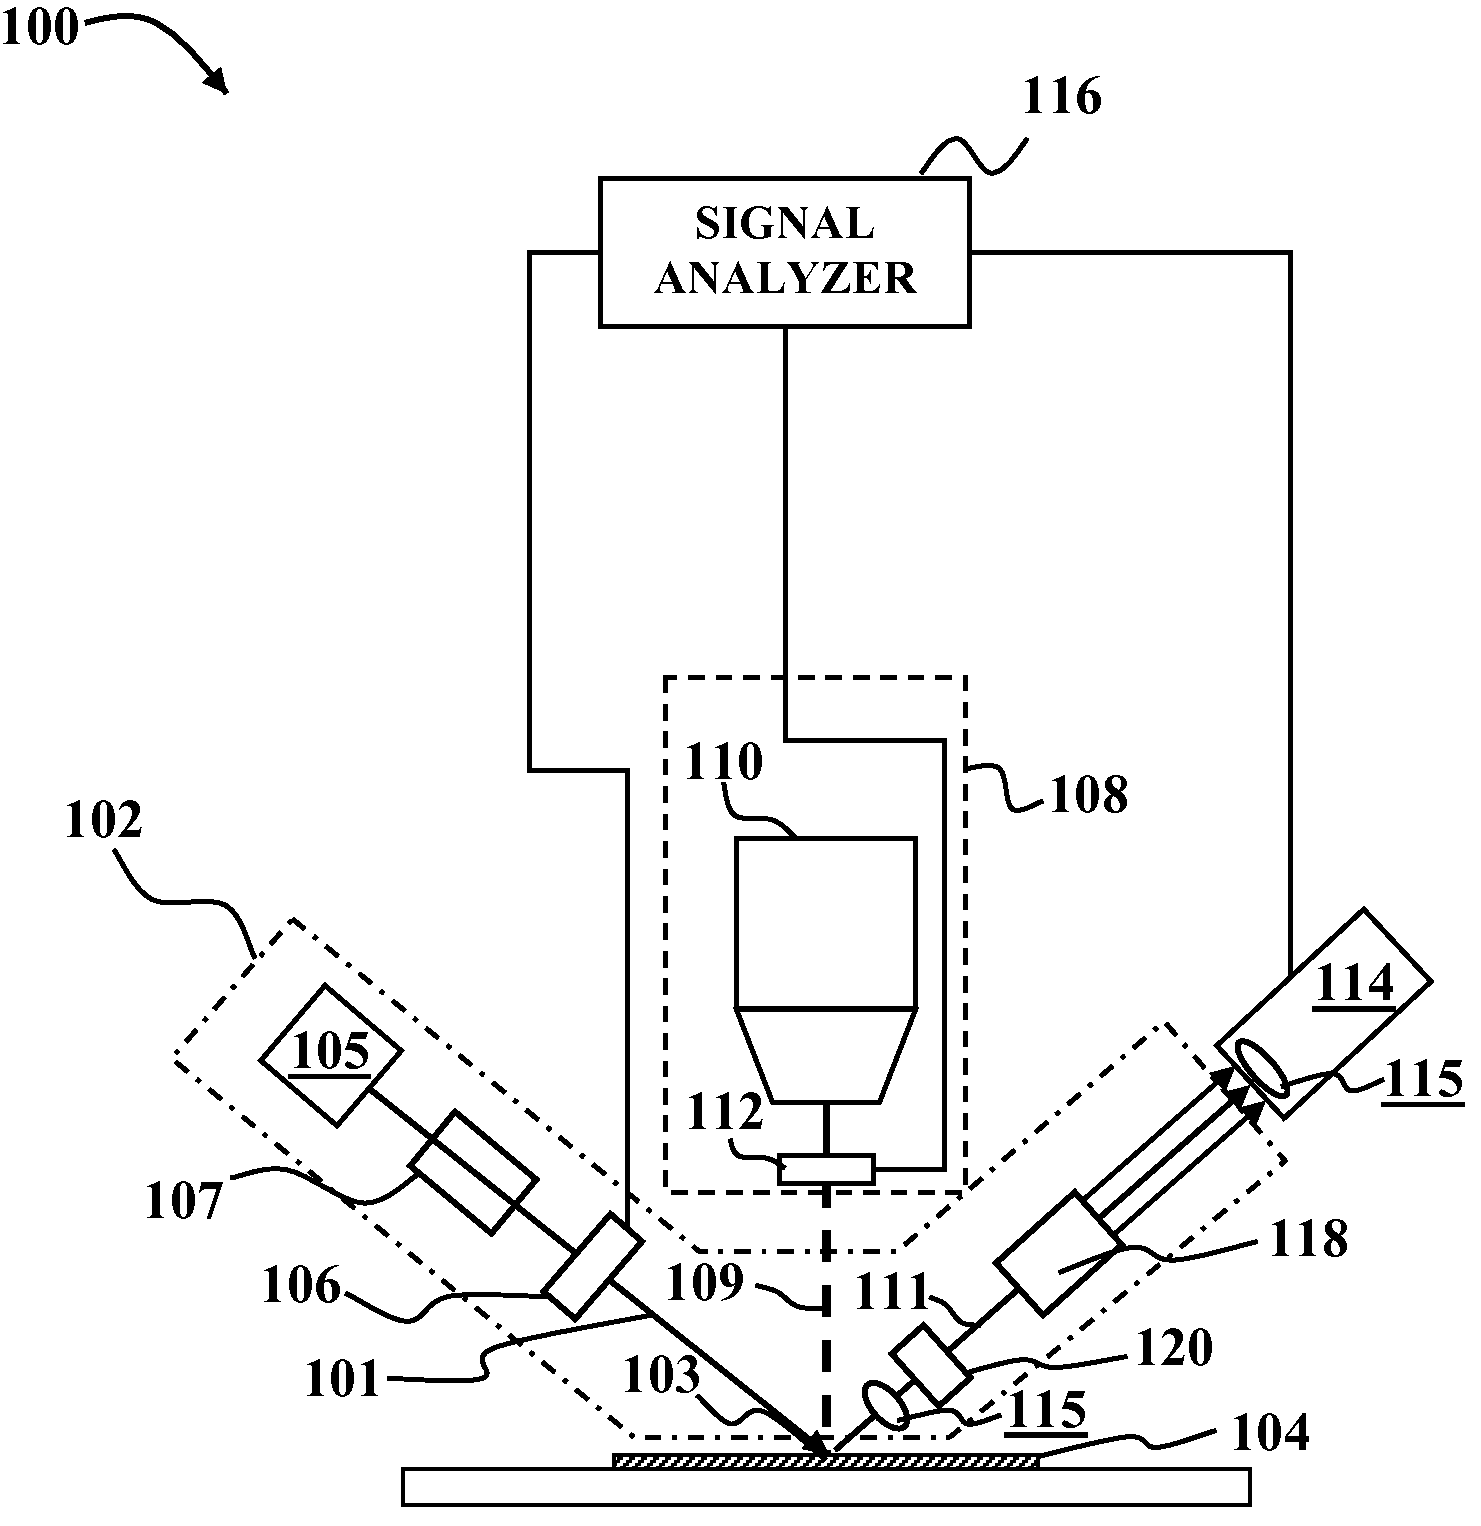 Optical measurment systems and methods